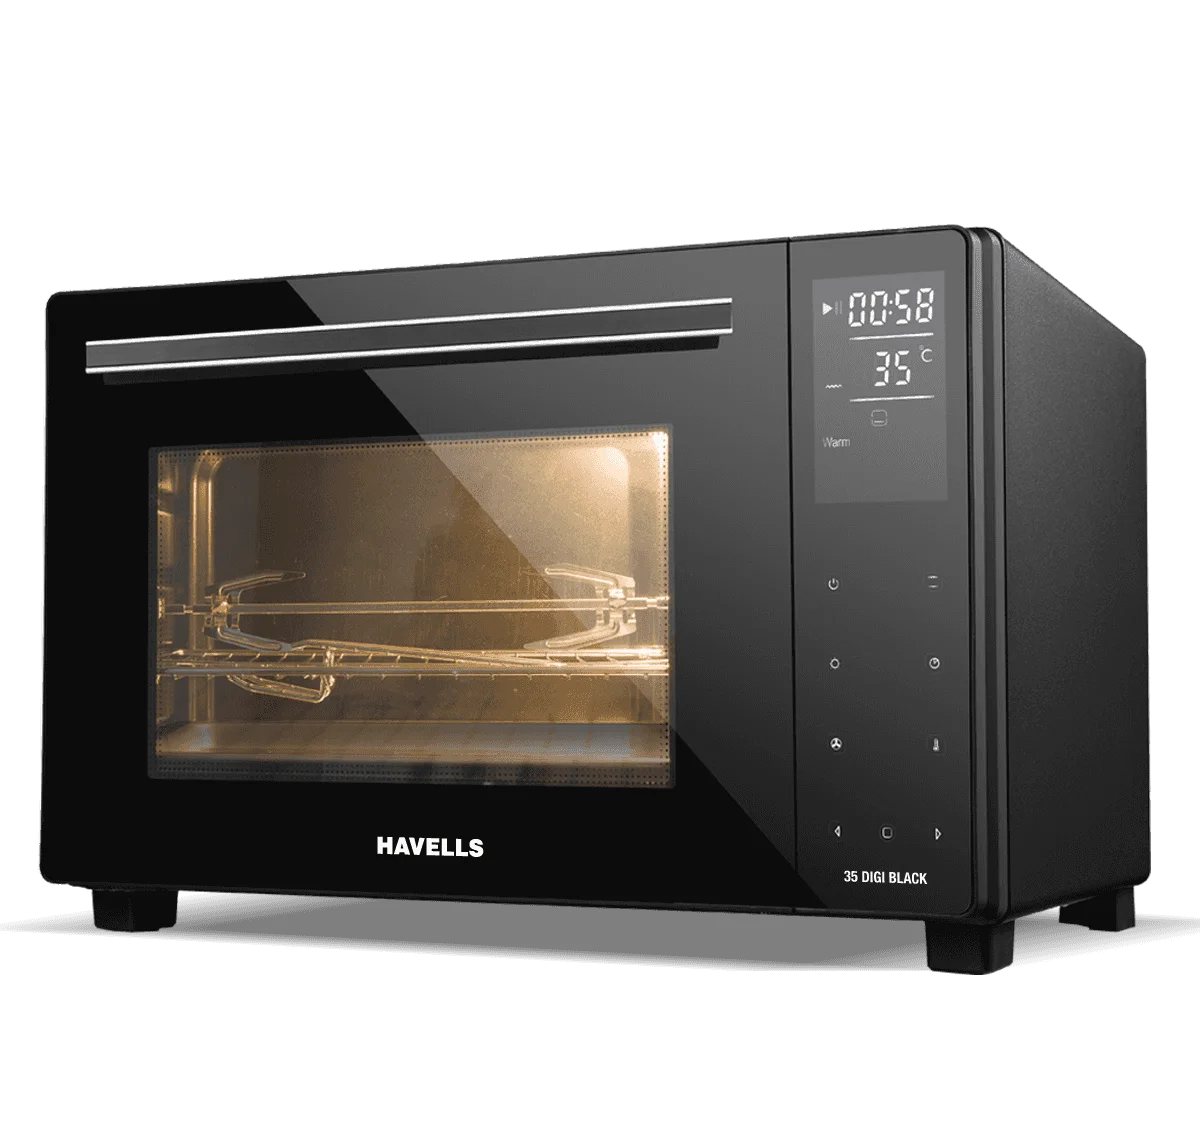 Havells Oven Toaster Griller Coimbatore